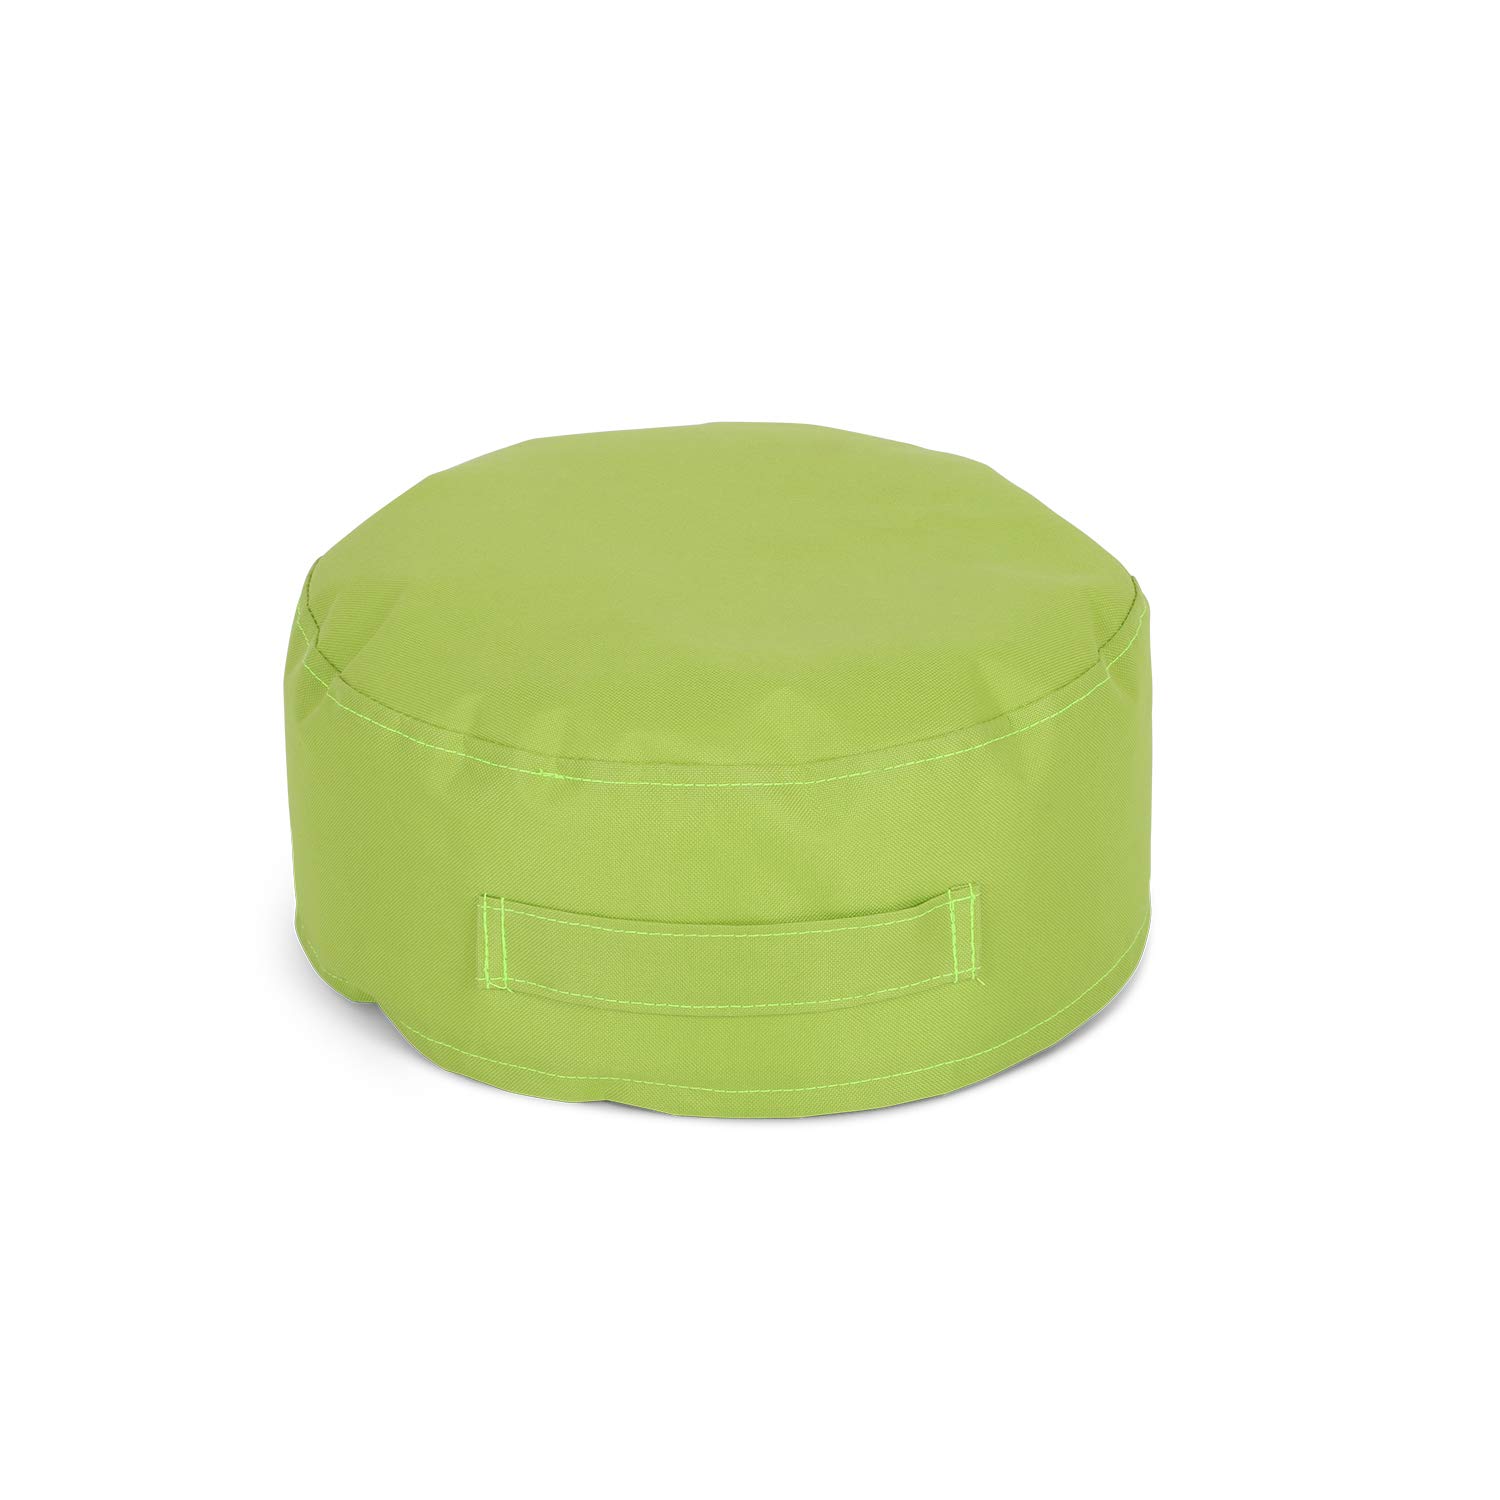 Knorr-Baby 440004 Stool Round S Colour Green